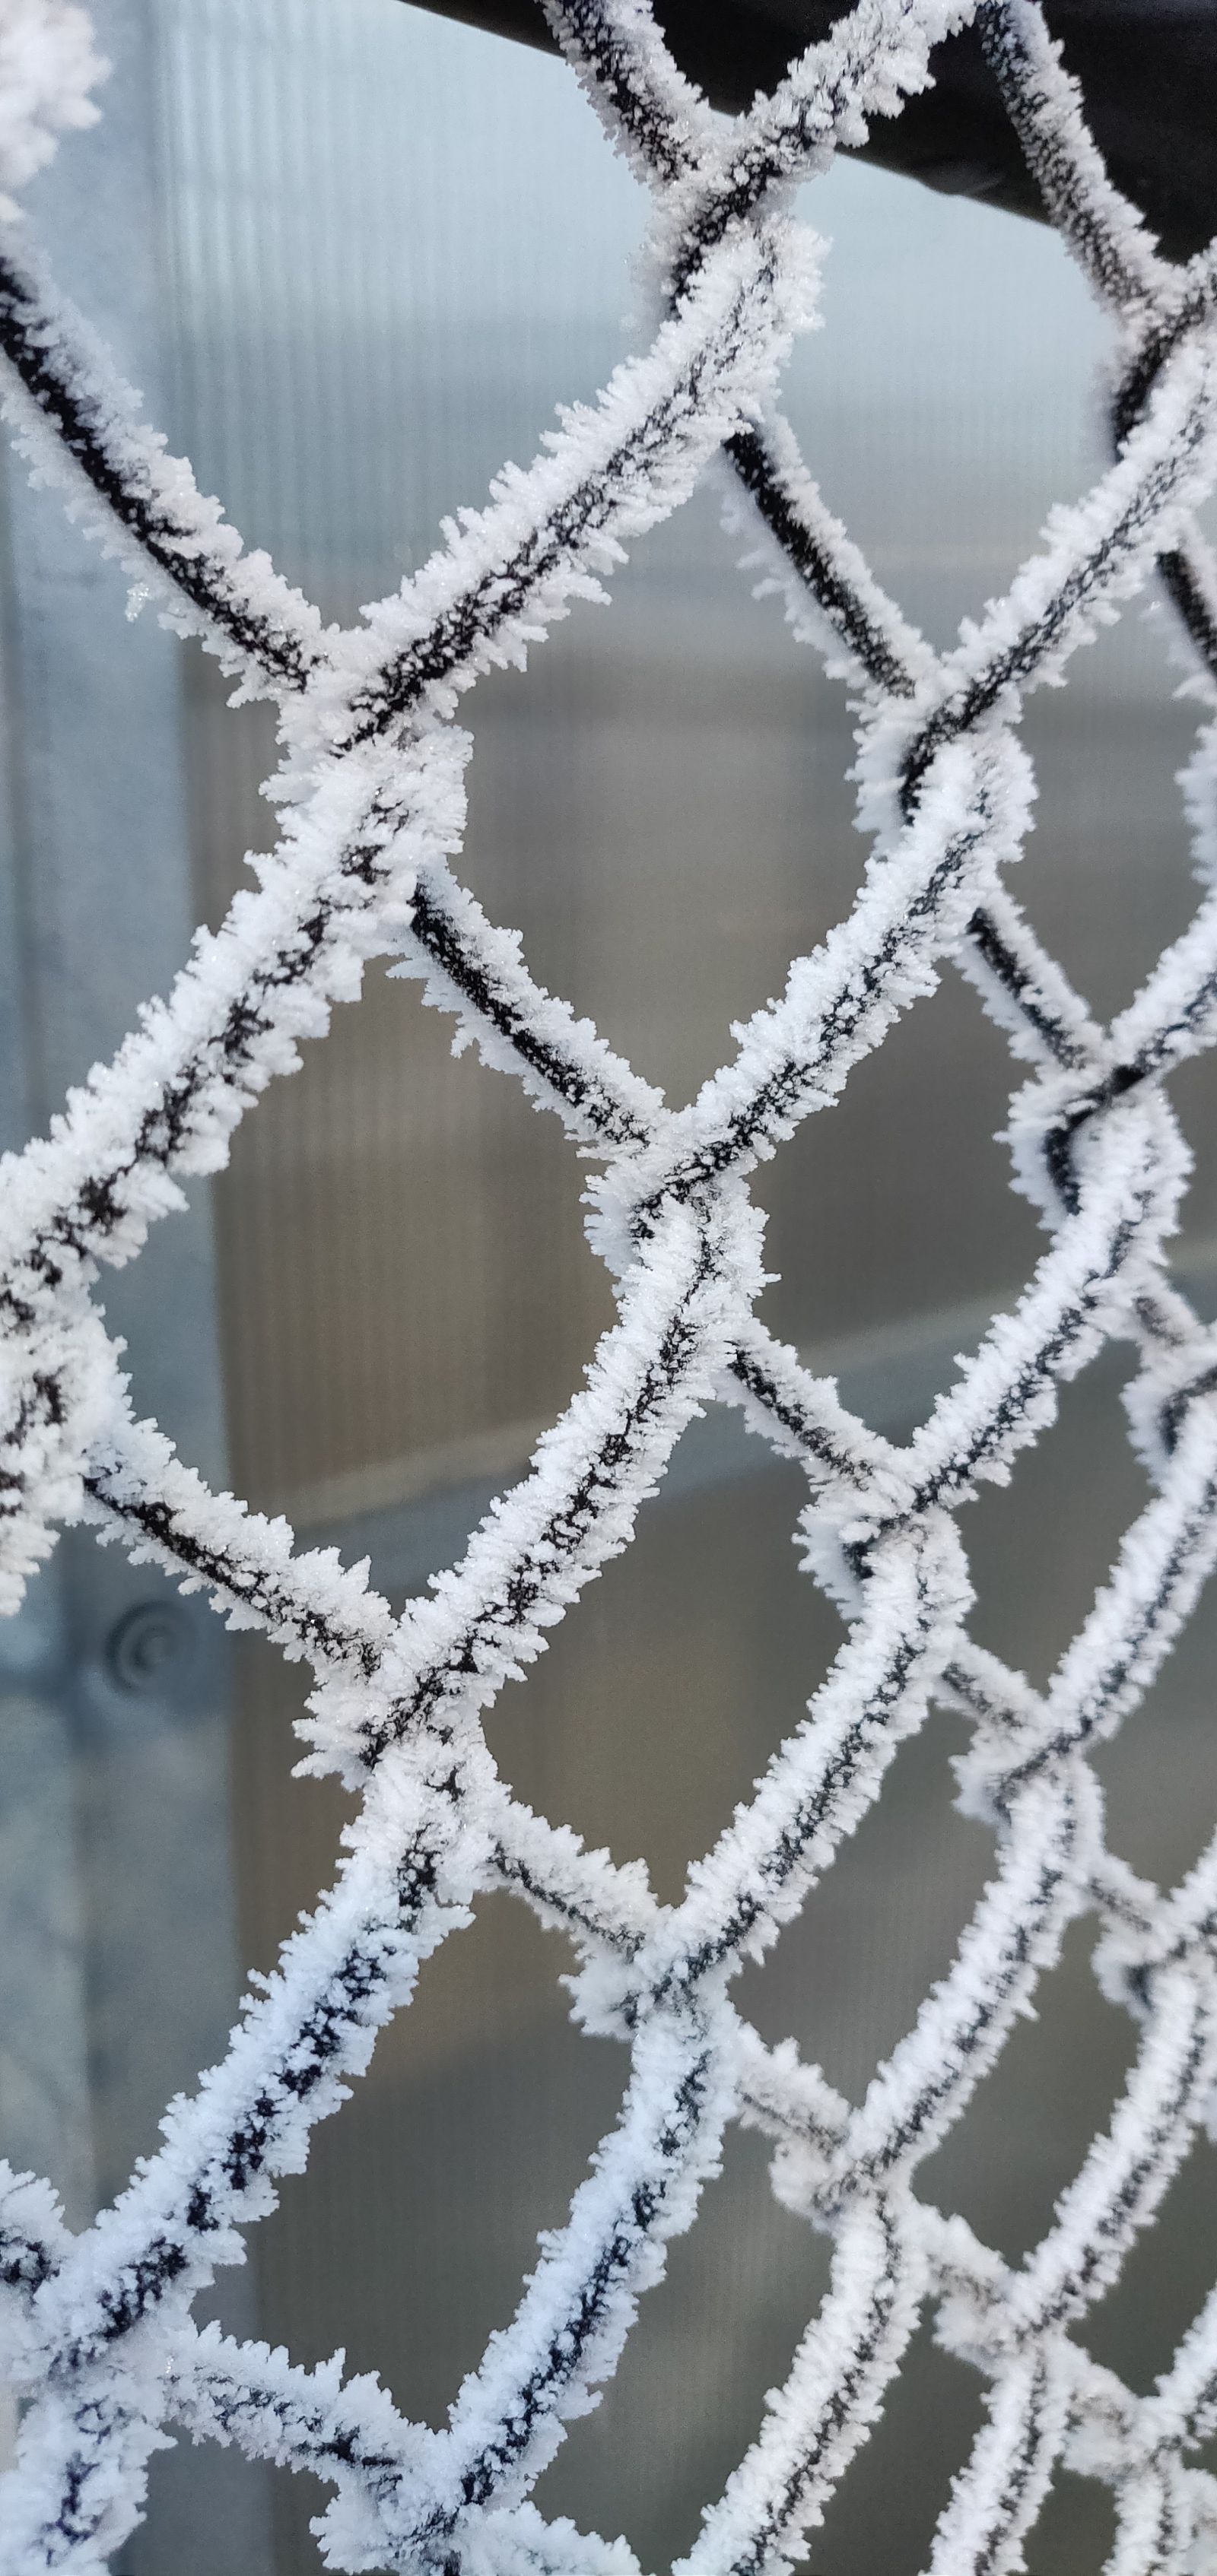 Frozen fog on a chain link fence- Christmas eve